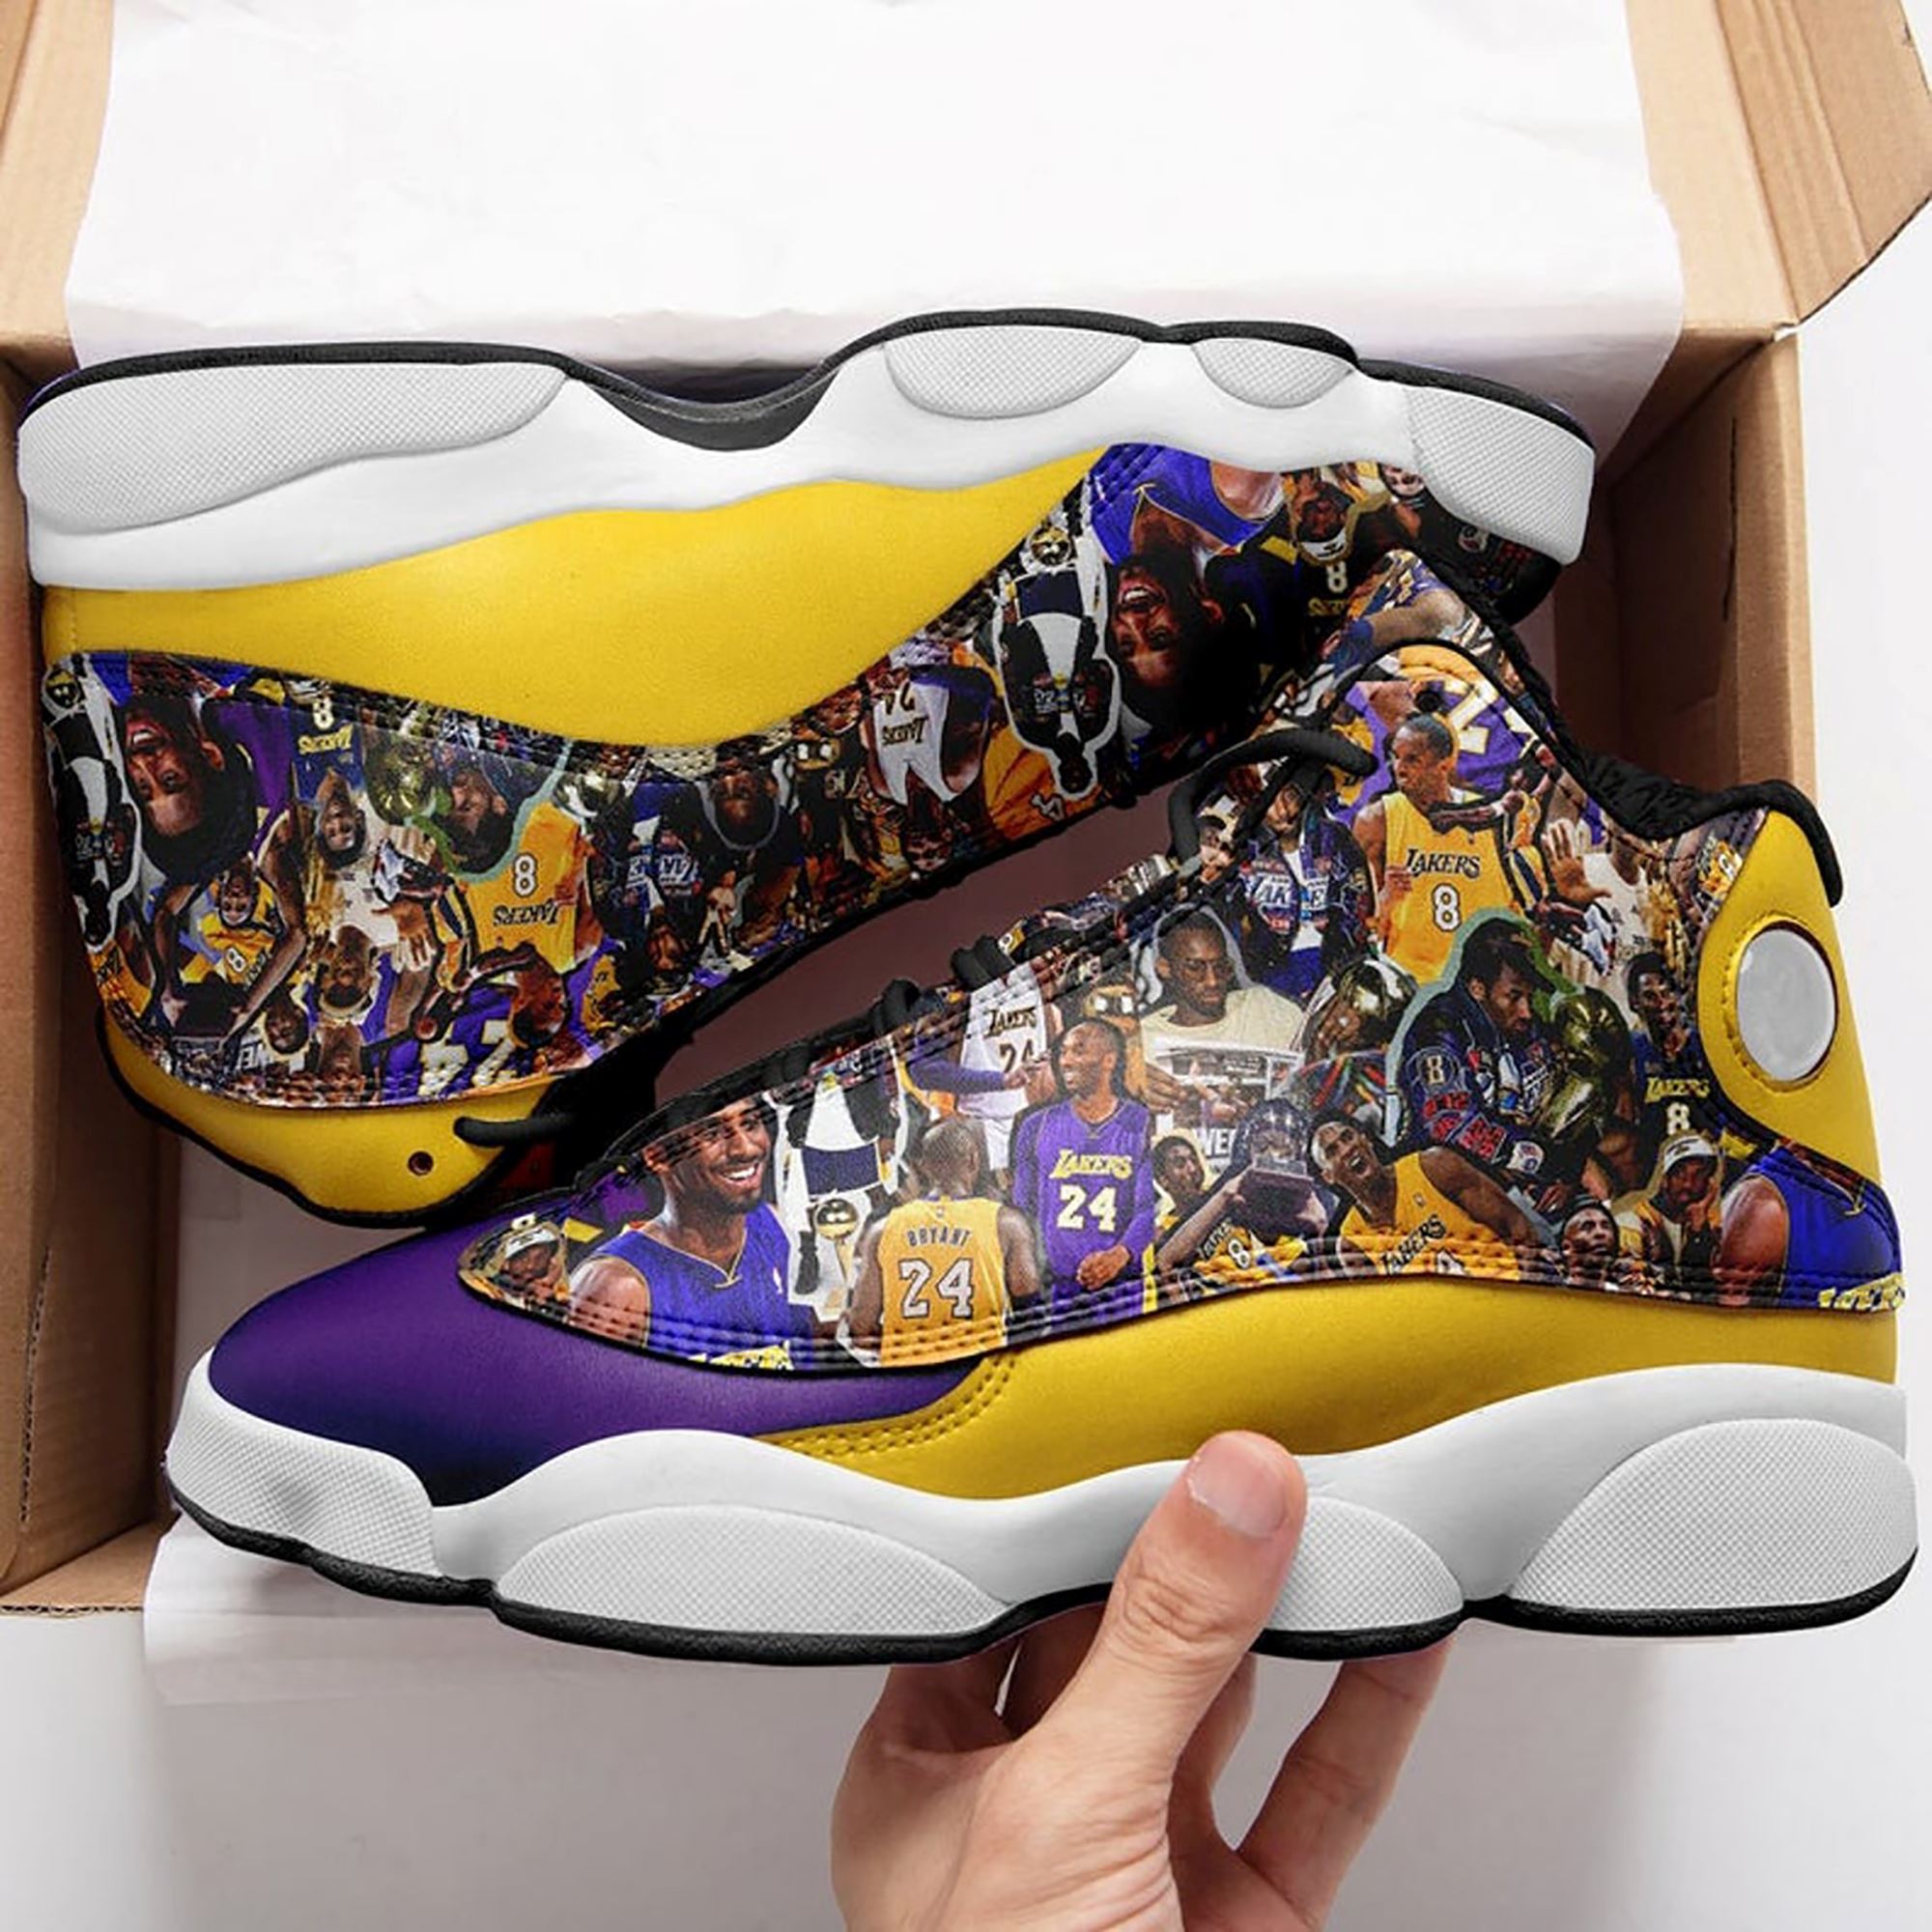 Kobe Bryant Leather Shoes Lakers 24 Air Jd13 Shoes Basketball Players Lover Gift Kobe Bryant Fans Gift Gift For Men